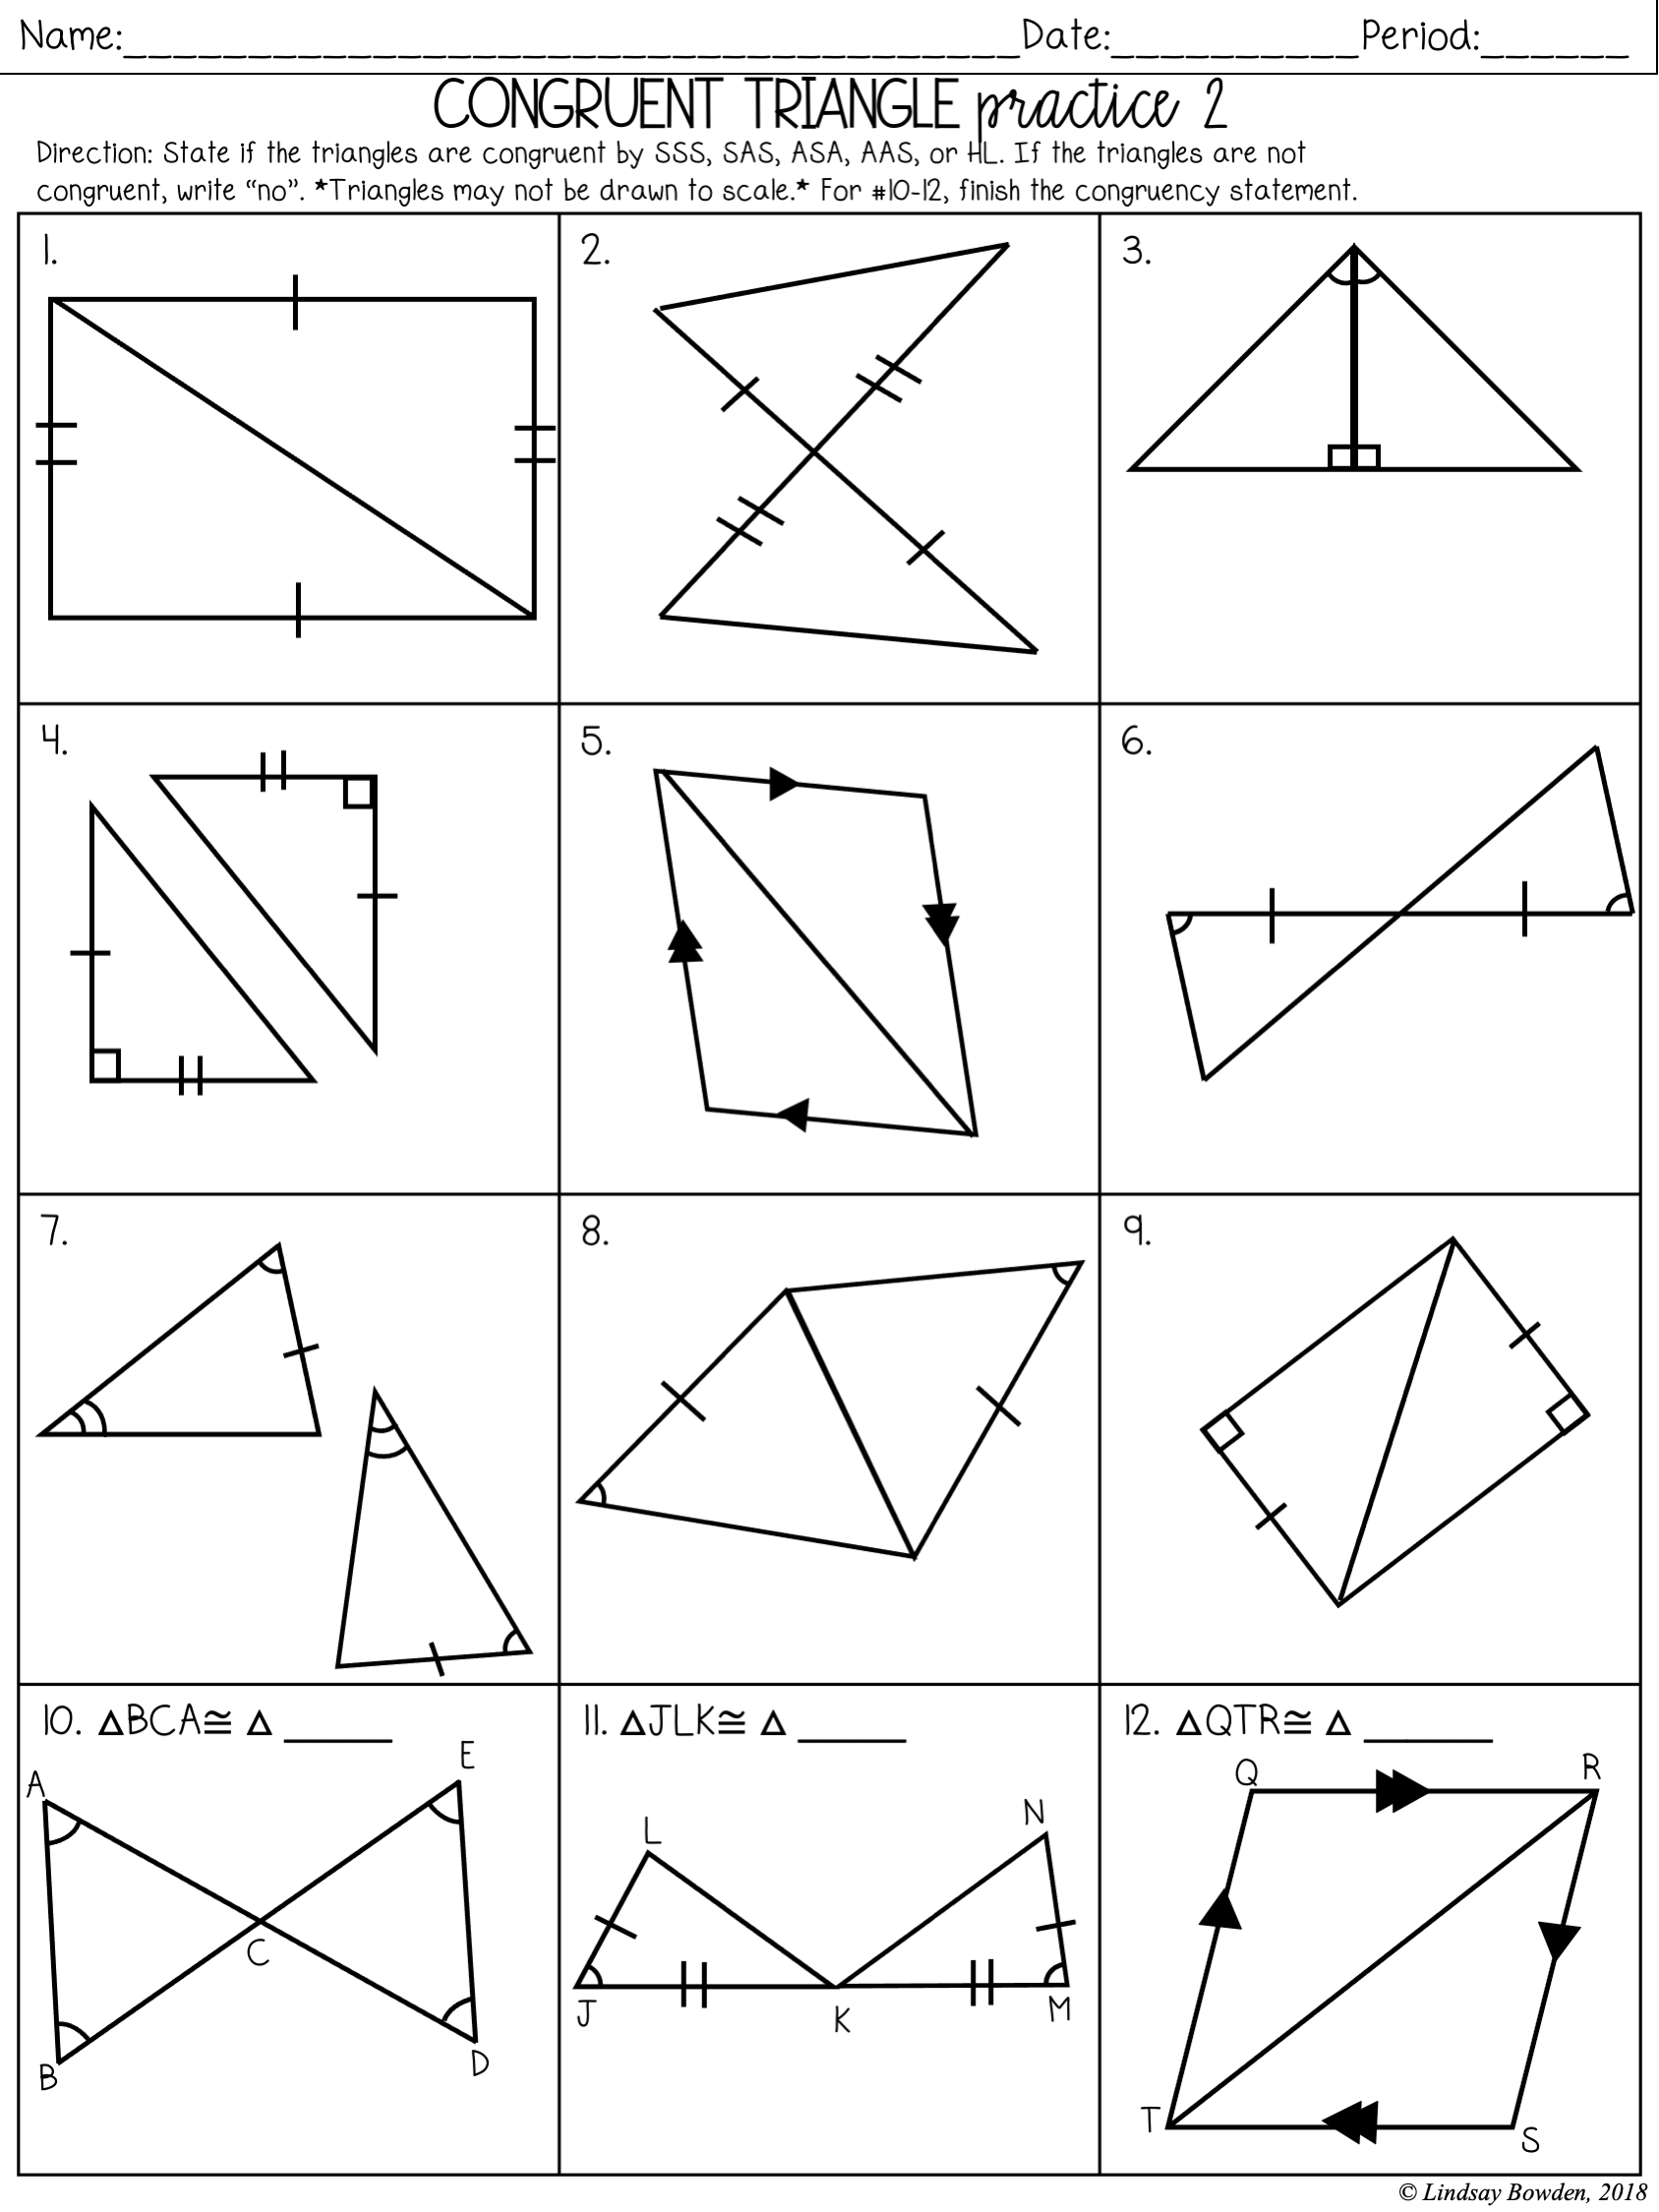 Congruent Triangles Notes and Worksheets - Lindsay Bowden Pertaining To Congruent Triangles Worksheet Answers